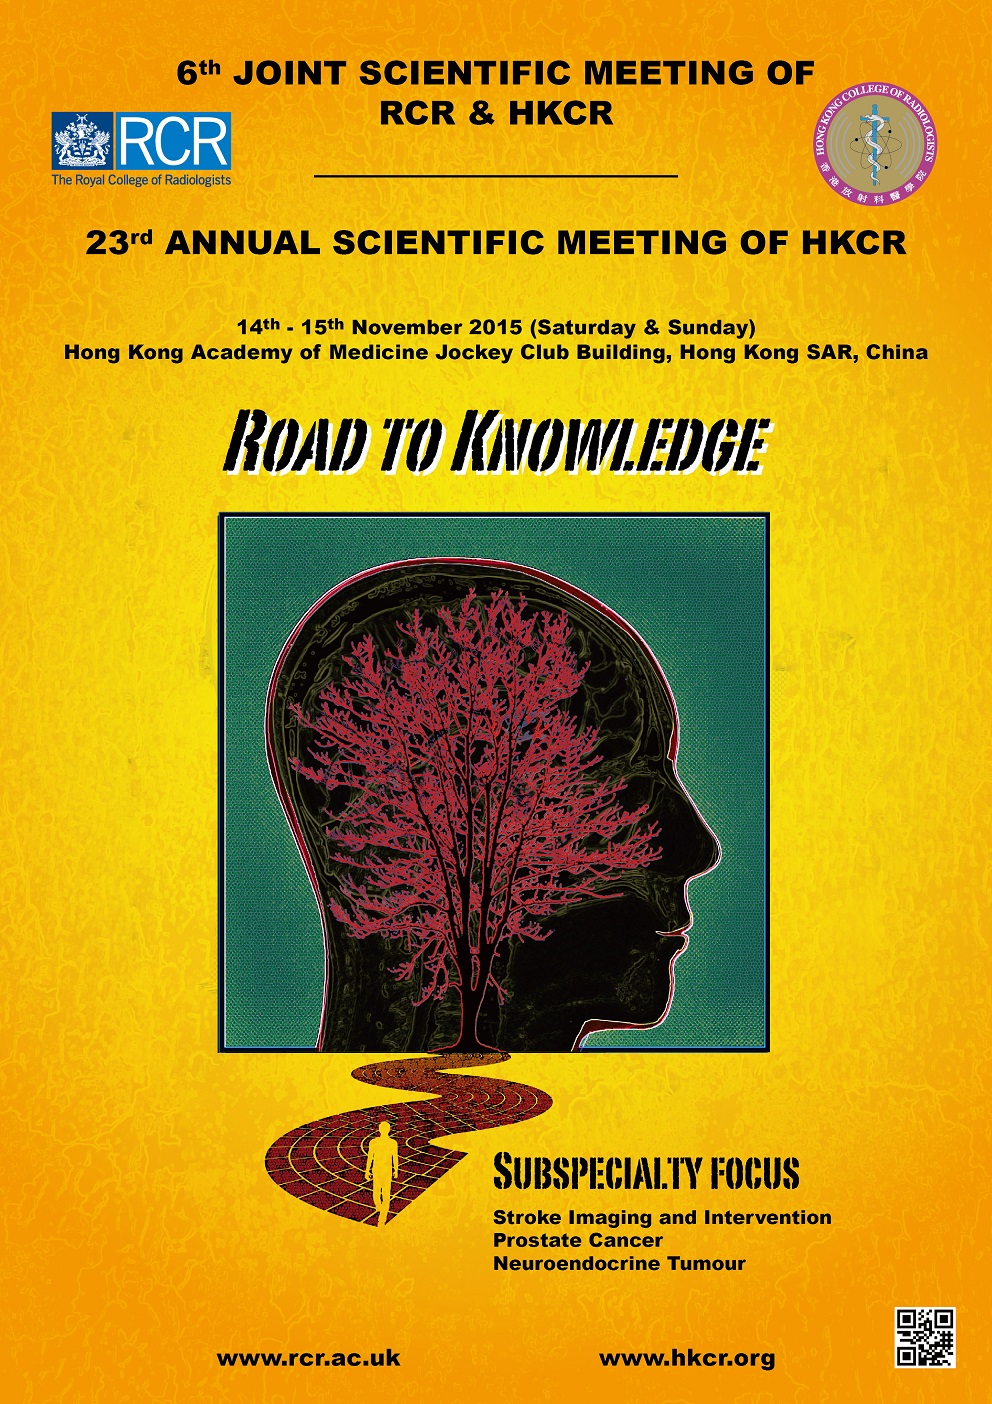 6th Joint Scientific Meeting of RCR & HKCR and 23rd Annual Scientific Meeting of HKCR